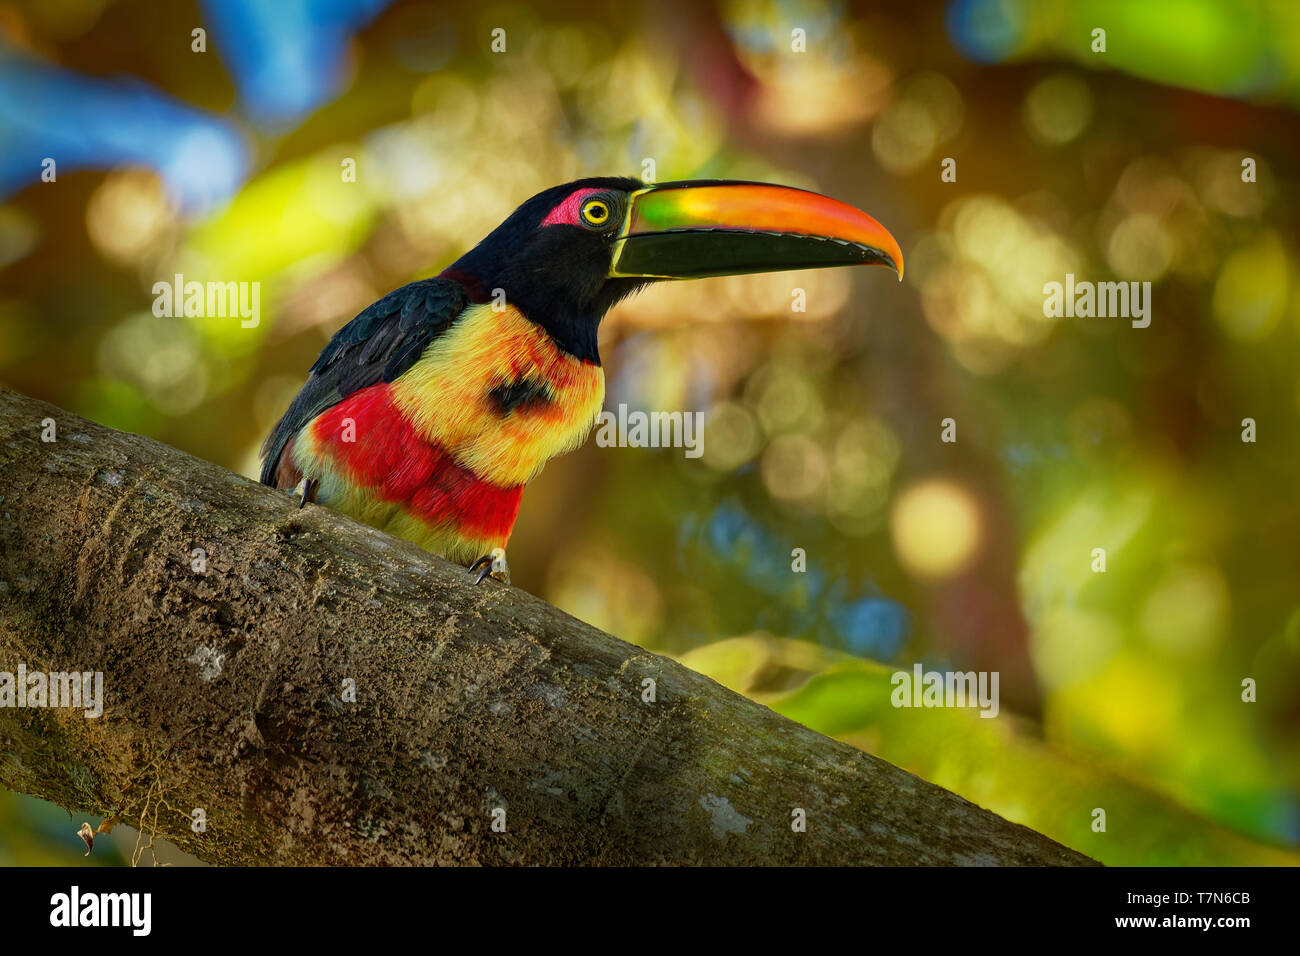 Fiery-billed Aracari - Pteroglossus frantzii is a toucan, a near-passerine bird. It breeds only on the Pacific slopes of southern Costa Rica and weste Stock Photo